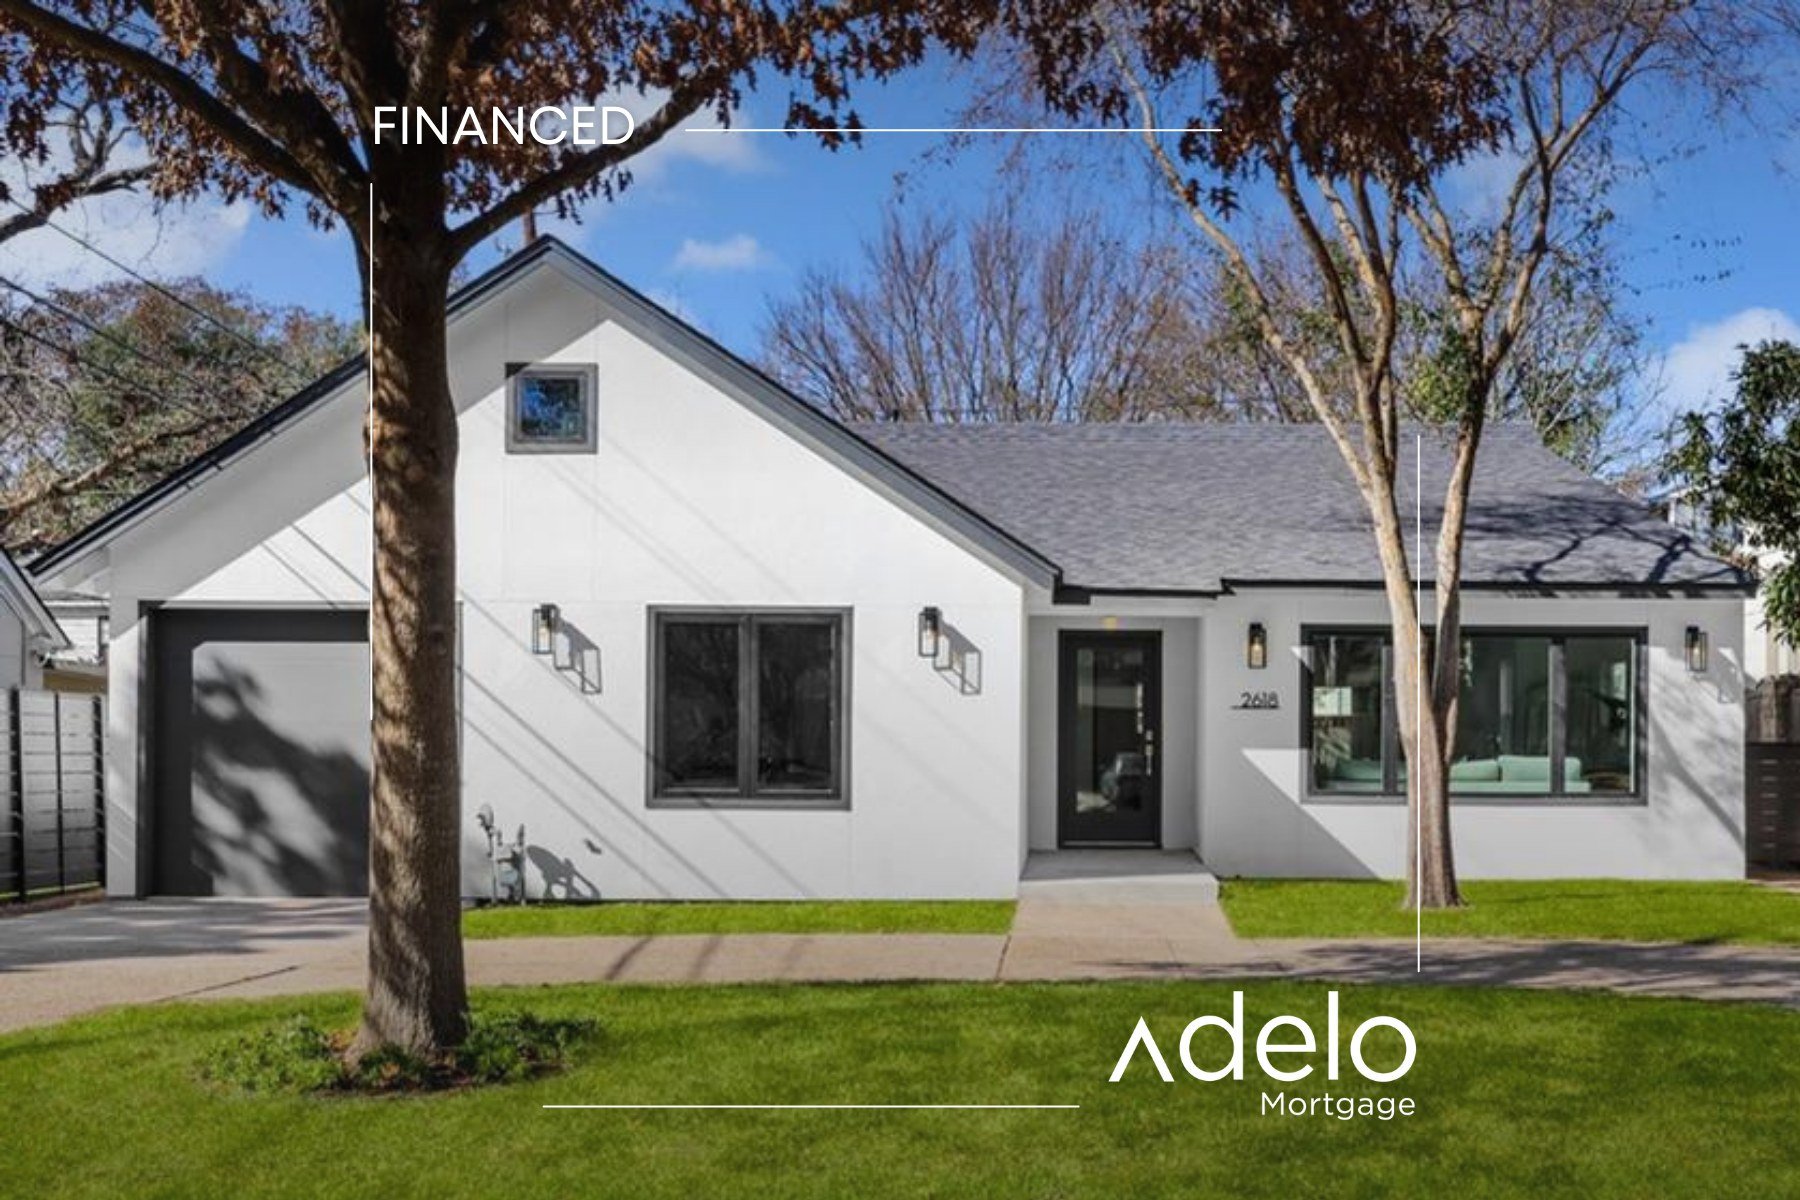 Financed by Adelo Mortgage